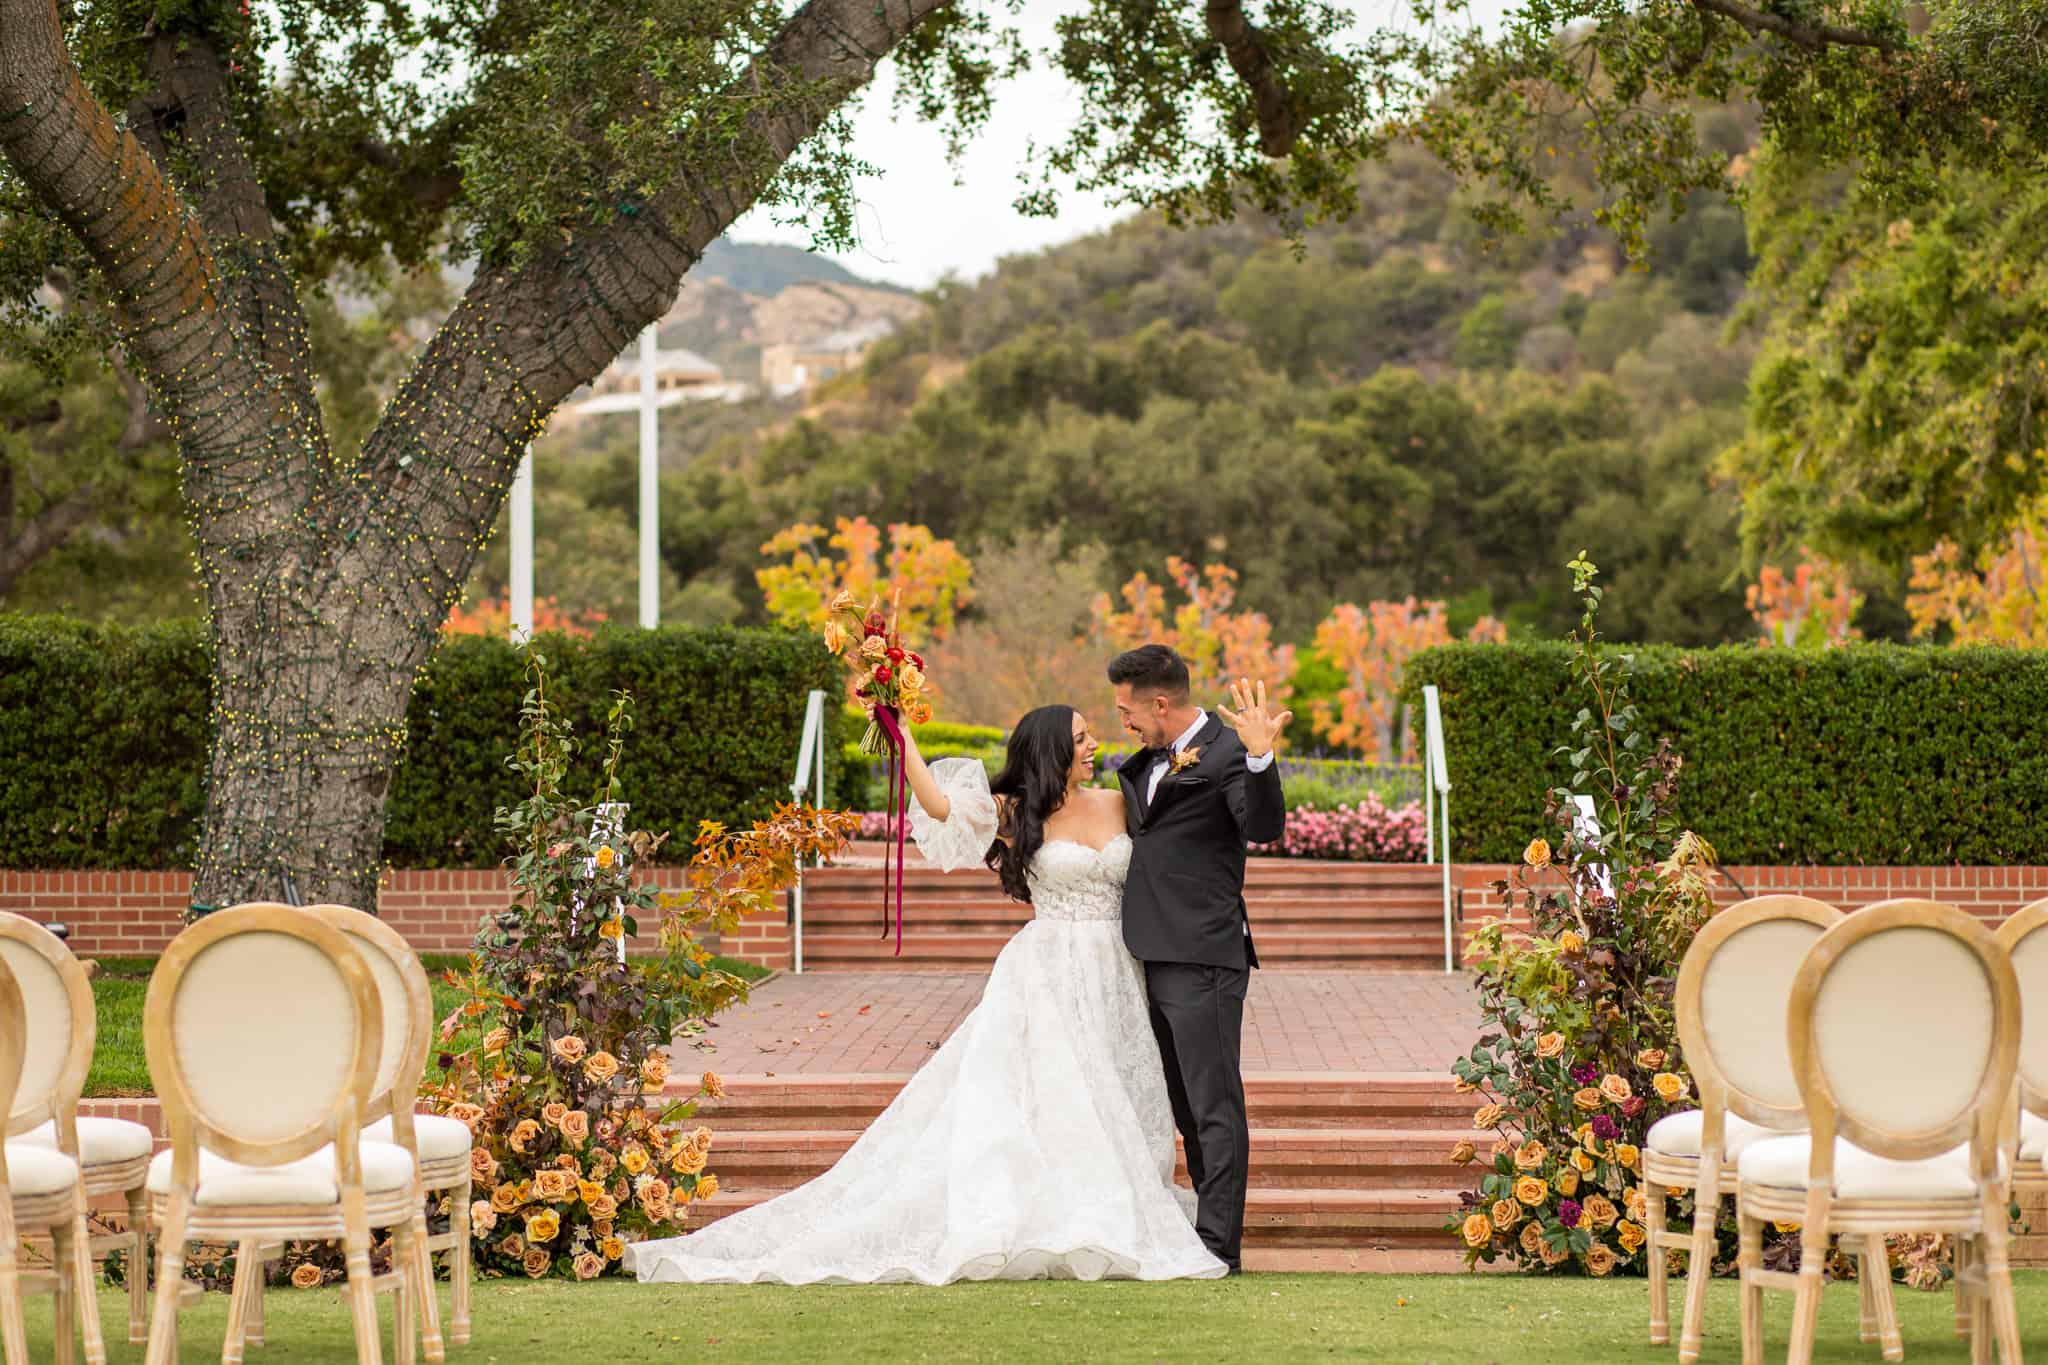 outdoor fall cermeony at Sherwood Country club with bride and groom hugging each other with one arm and raising their other arm in the air in celebration